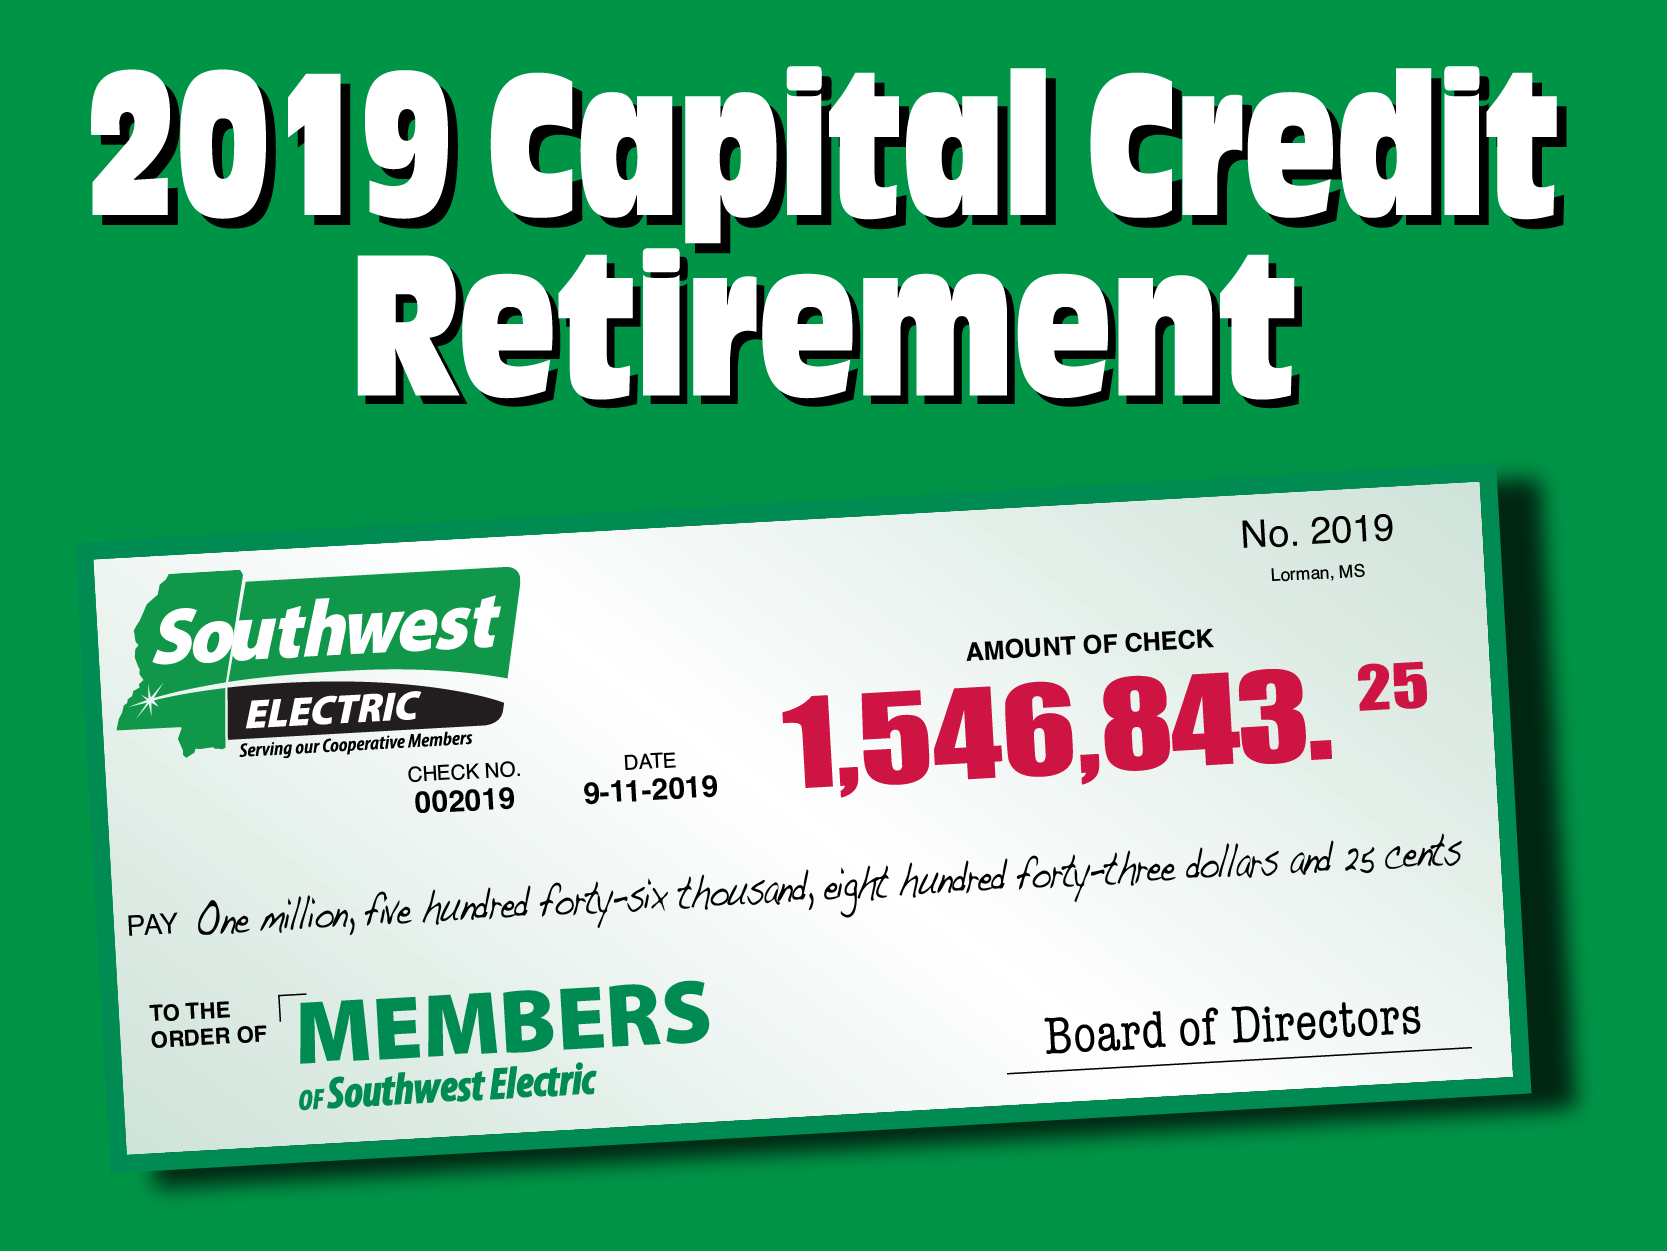 southwest-electric-returns-1-546-843-25-in-capital-credits-in